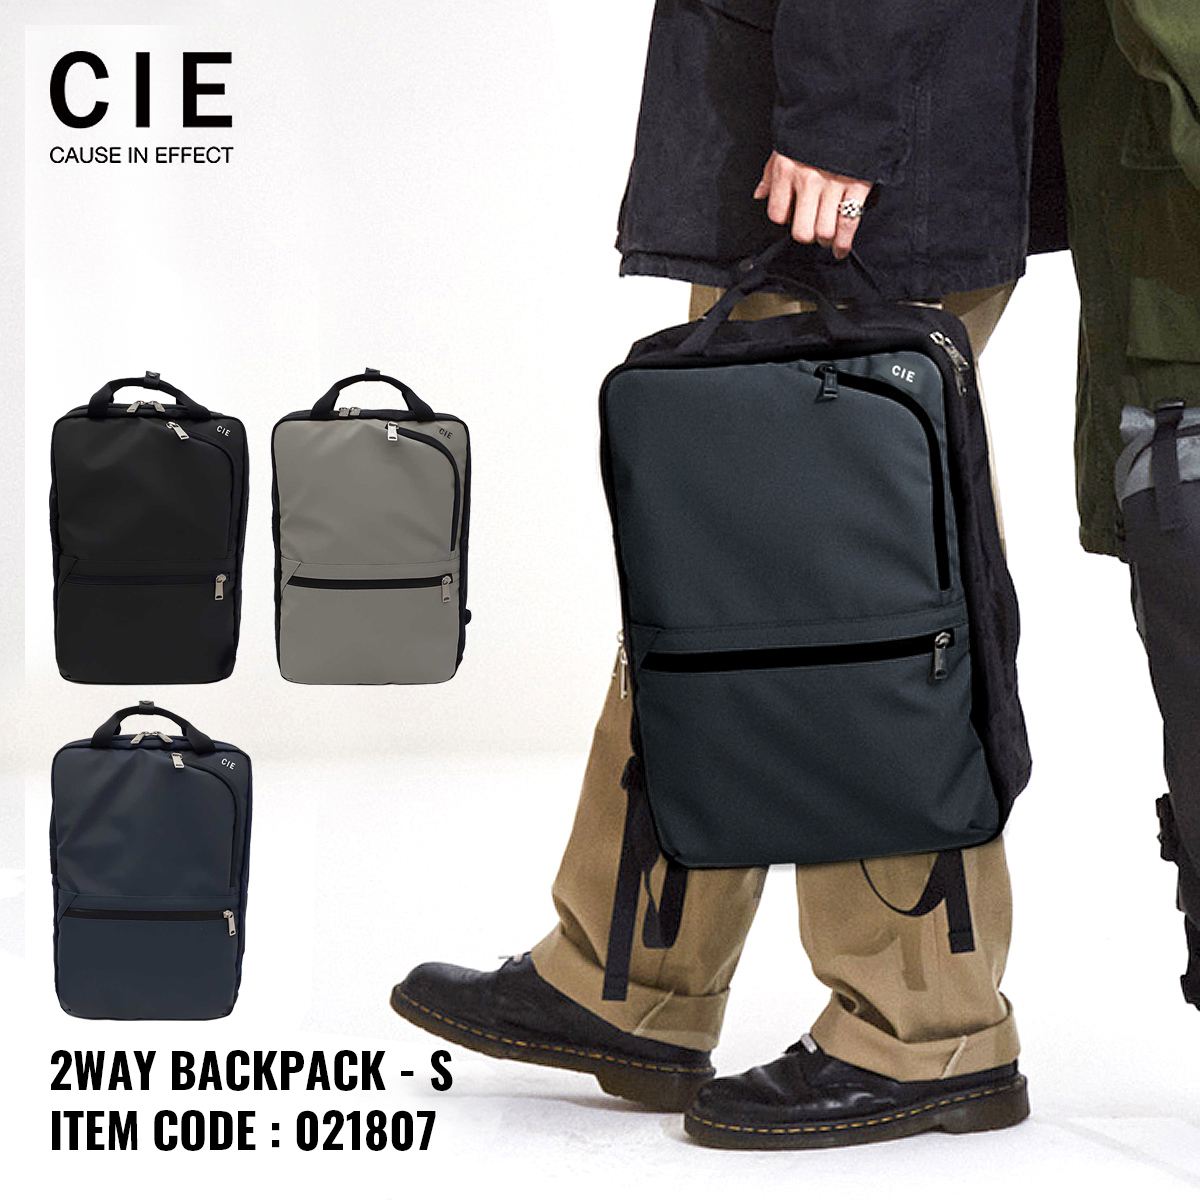 CIE リュック VARIOUS 2WAYBACKPACK S メンズ レディース 021807 シー ヴァリアス | バックパック リュックサック ナイロン A4対応 防水 撥水 軽量 日本製[PO10][即日発送]